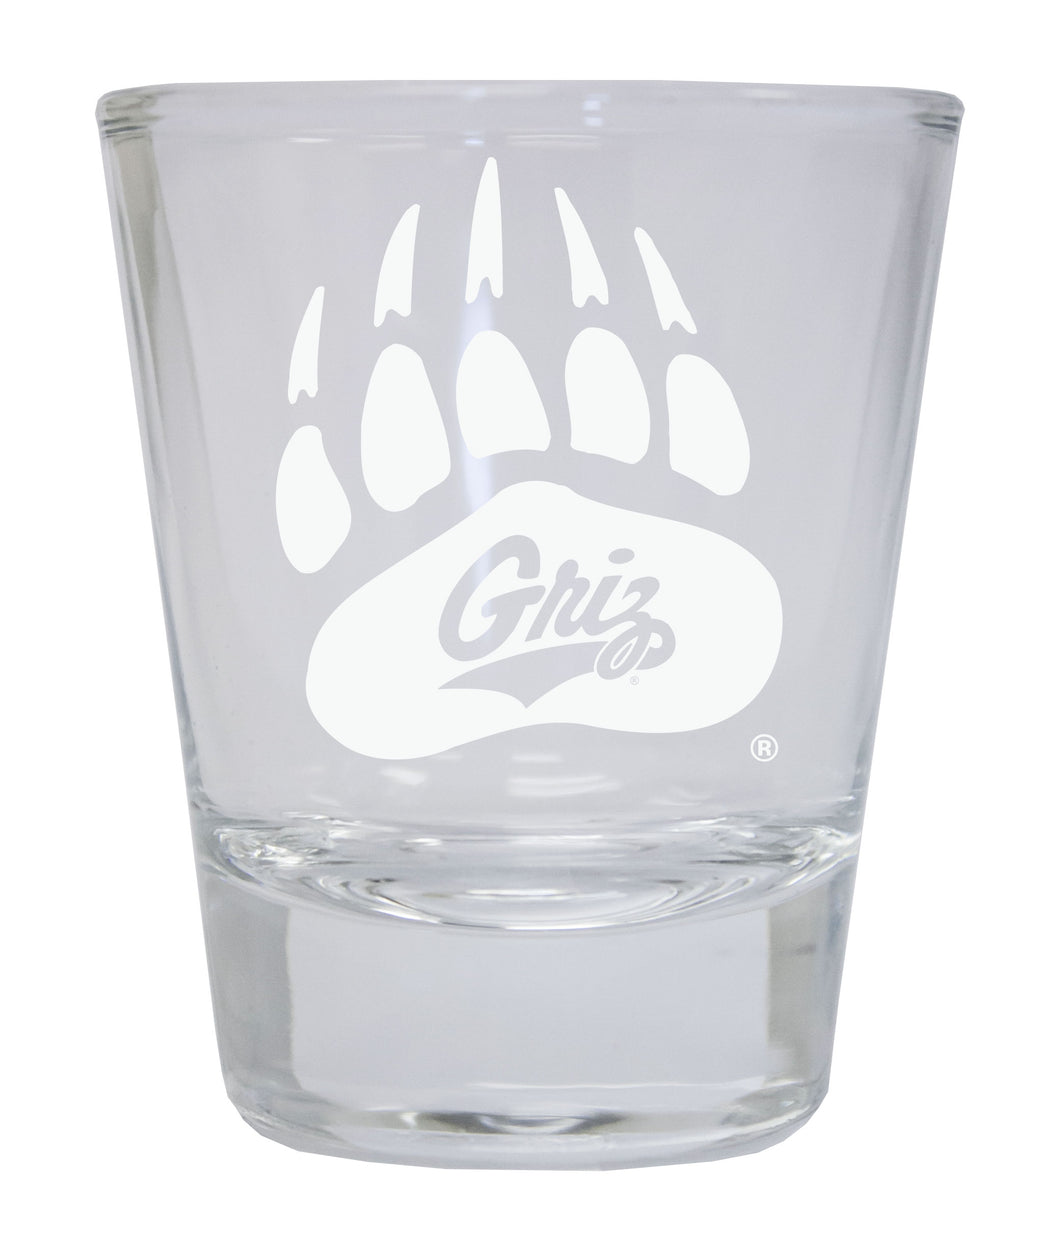 Montana University Etched Round Shot Glass Officially Licensed Collegiate Product